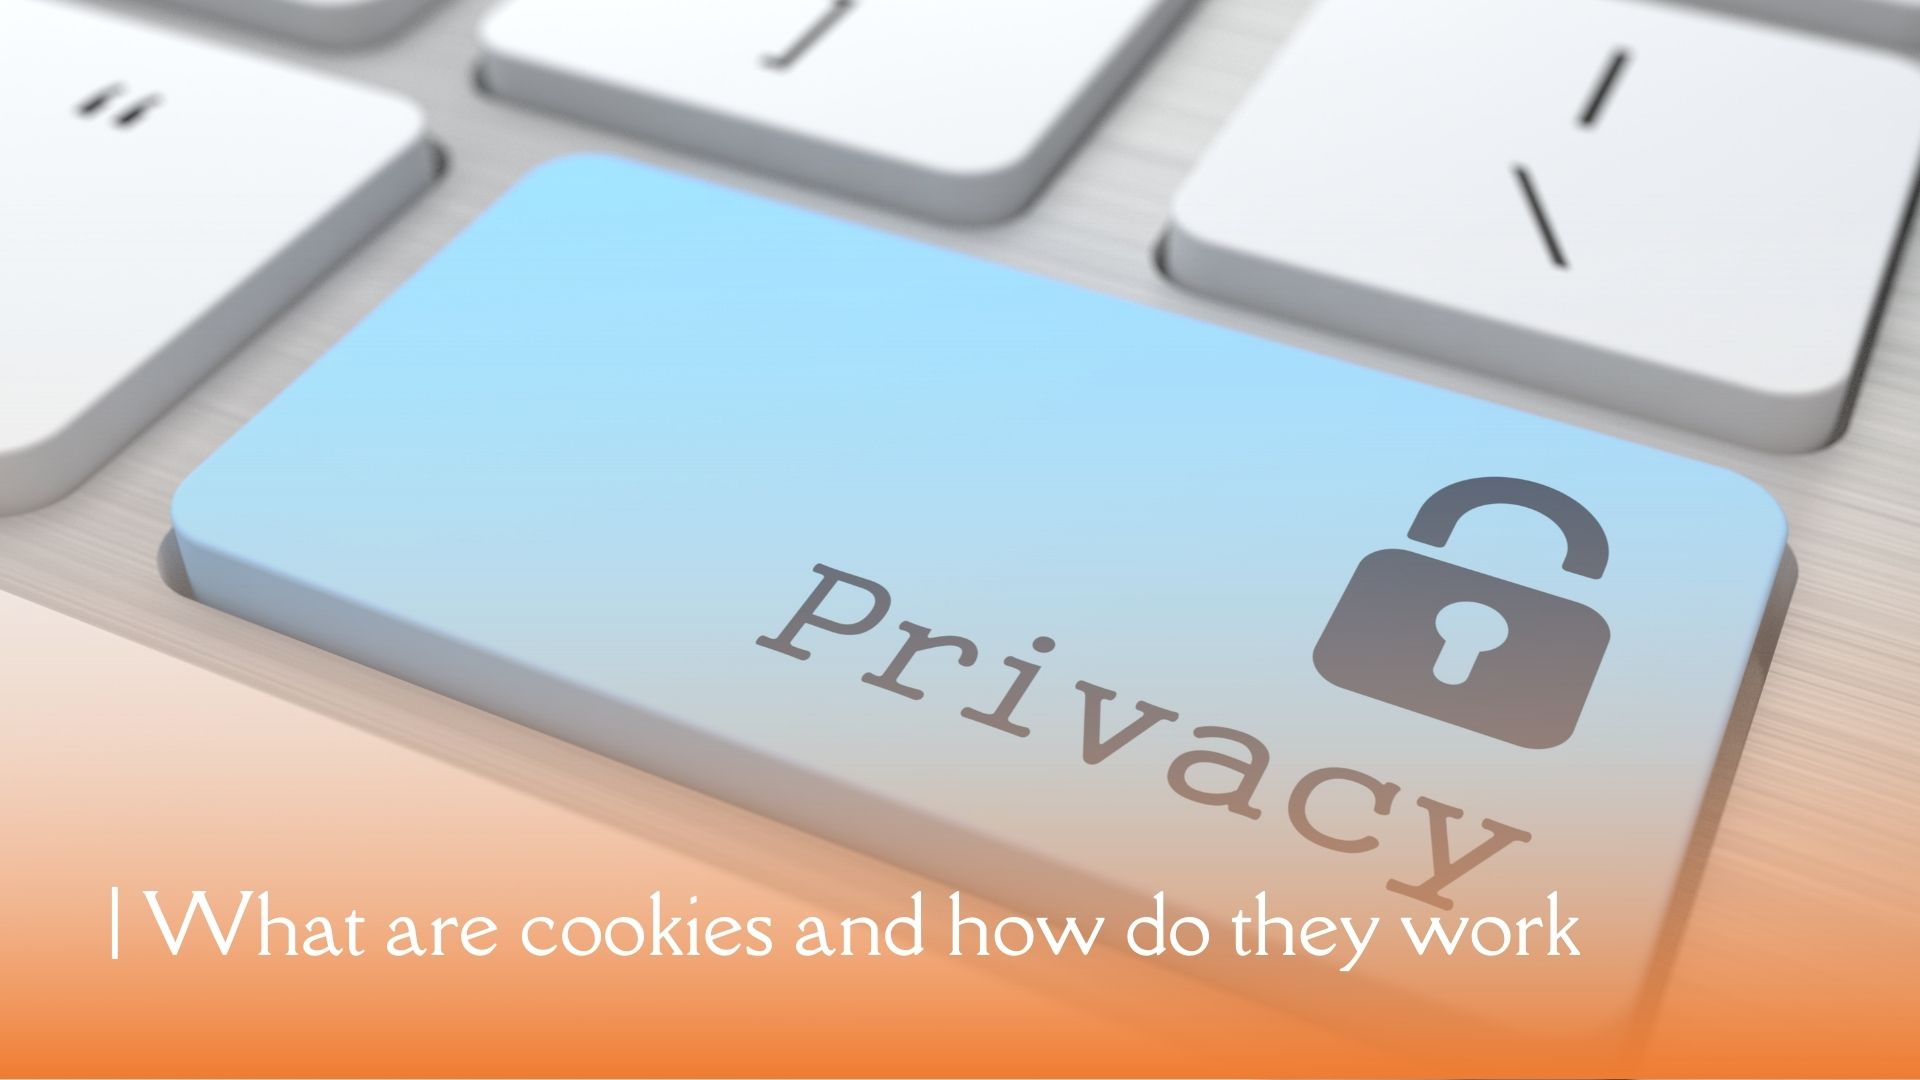 Privacy and web cookies